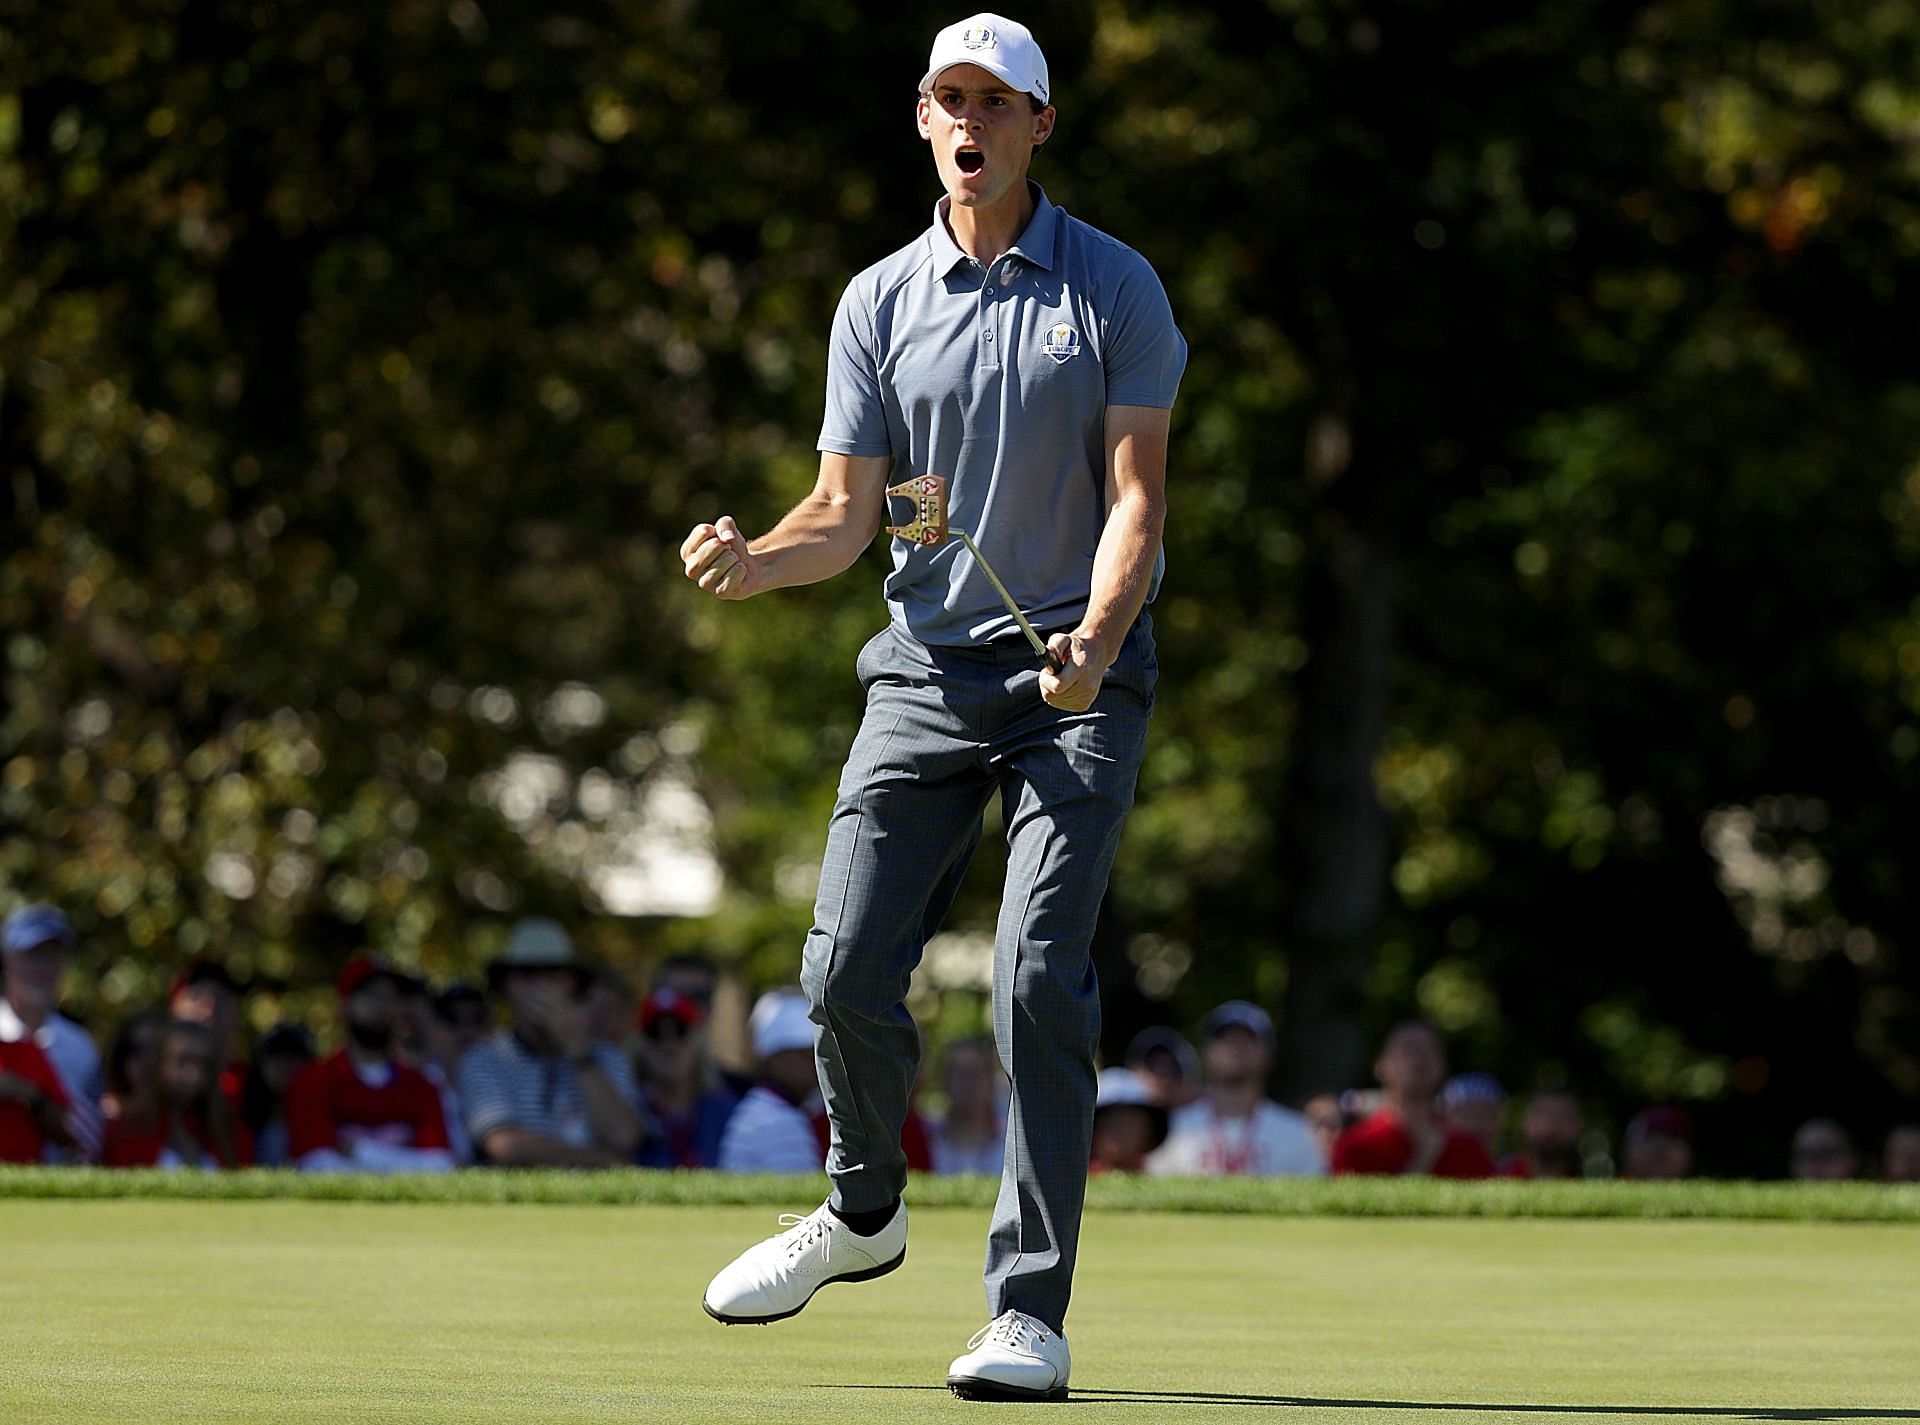 Thomas Pieters at the 2016 Ryder Cup - Singles Matches (Image via Streeter Lecka/Getty Images)